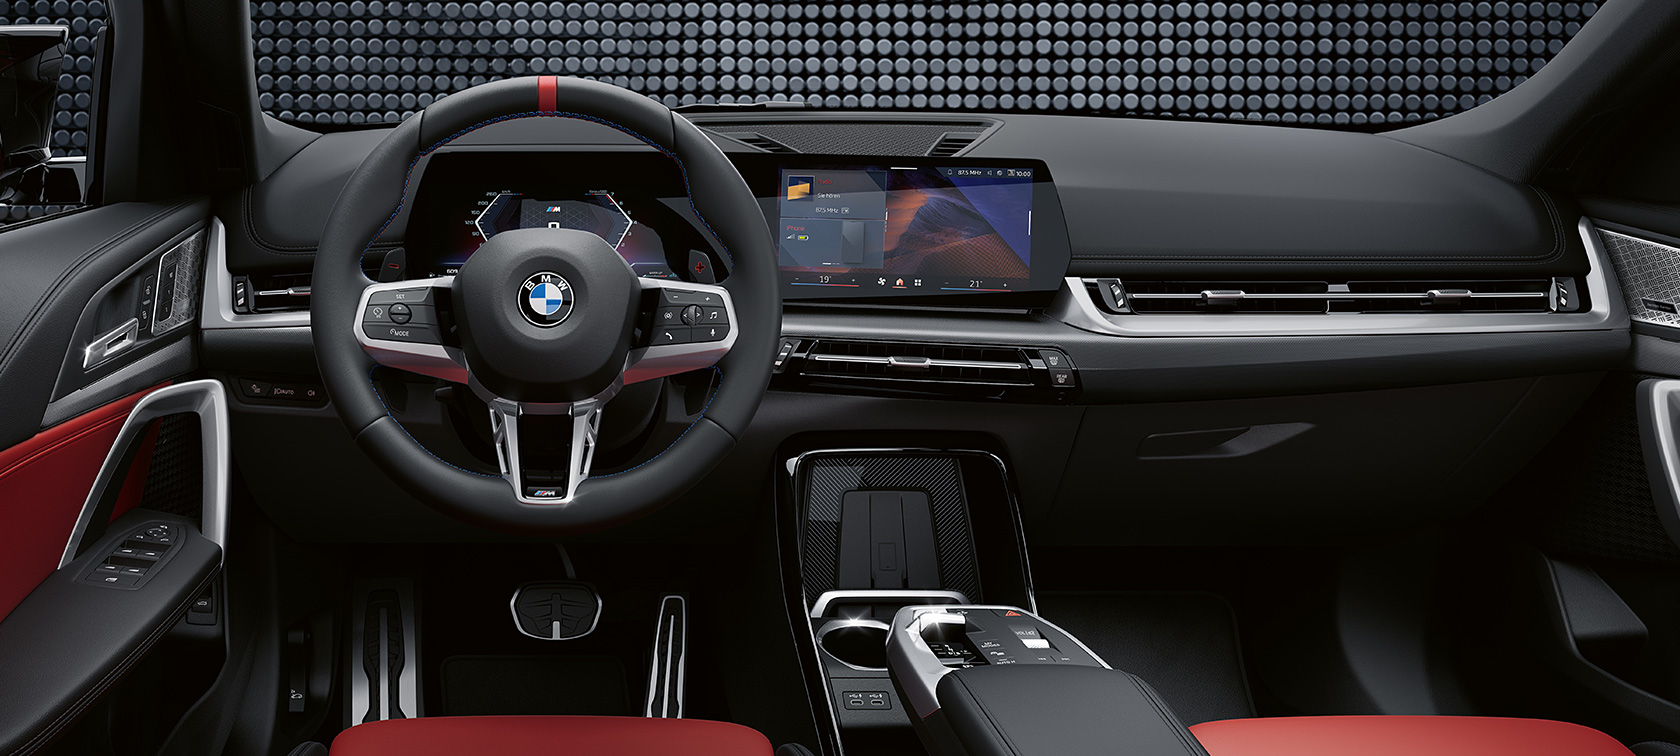 BMW X1 M35i xDrive Detail interior steering wheel and display